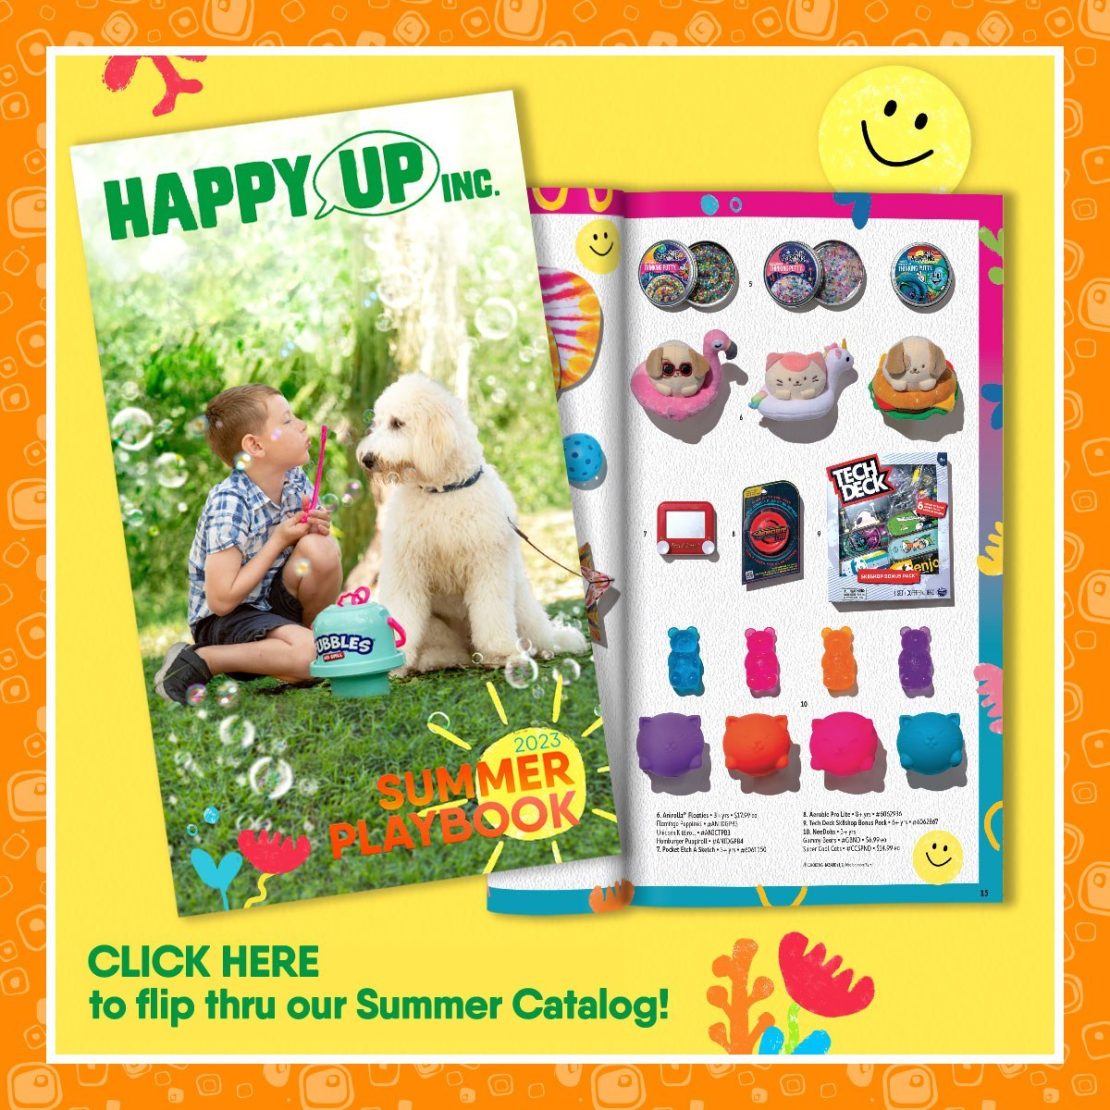 Flip through our Summer Catalog on your favorite device!